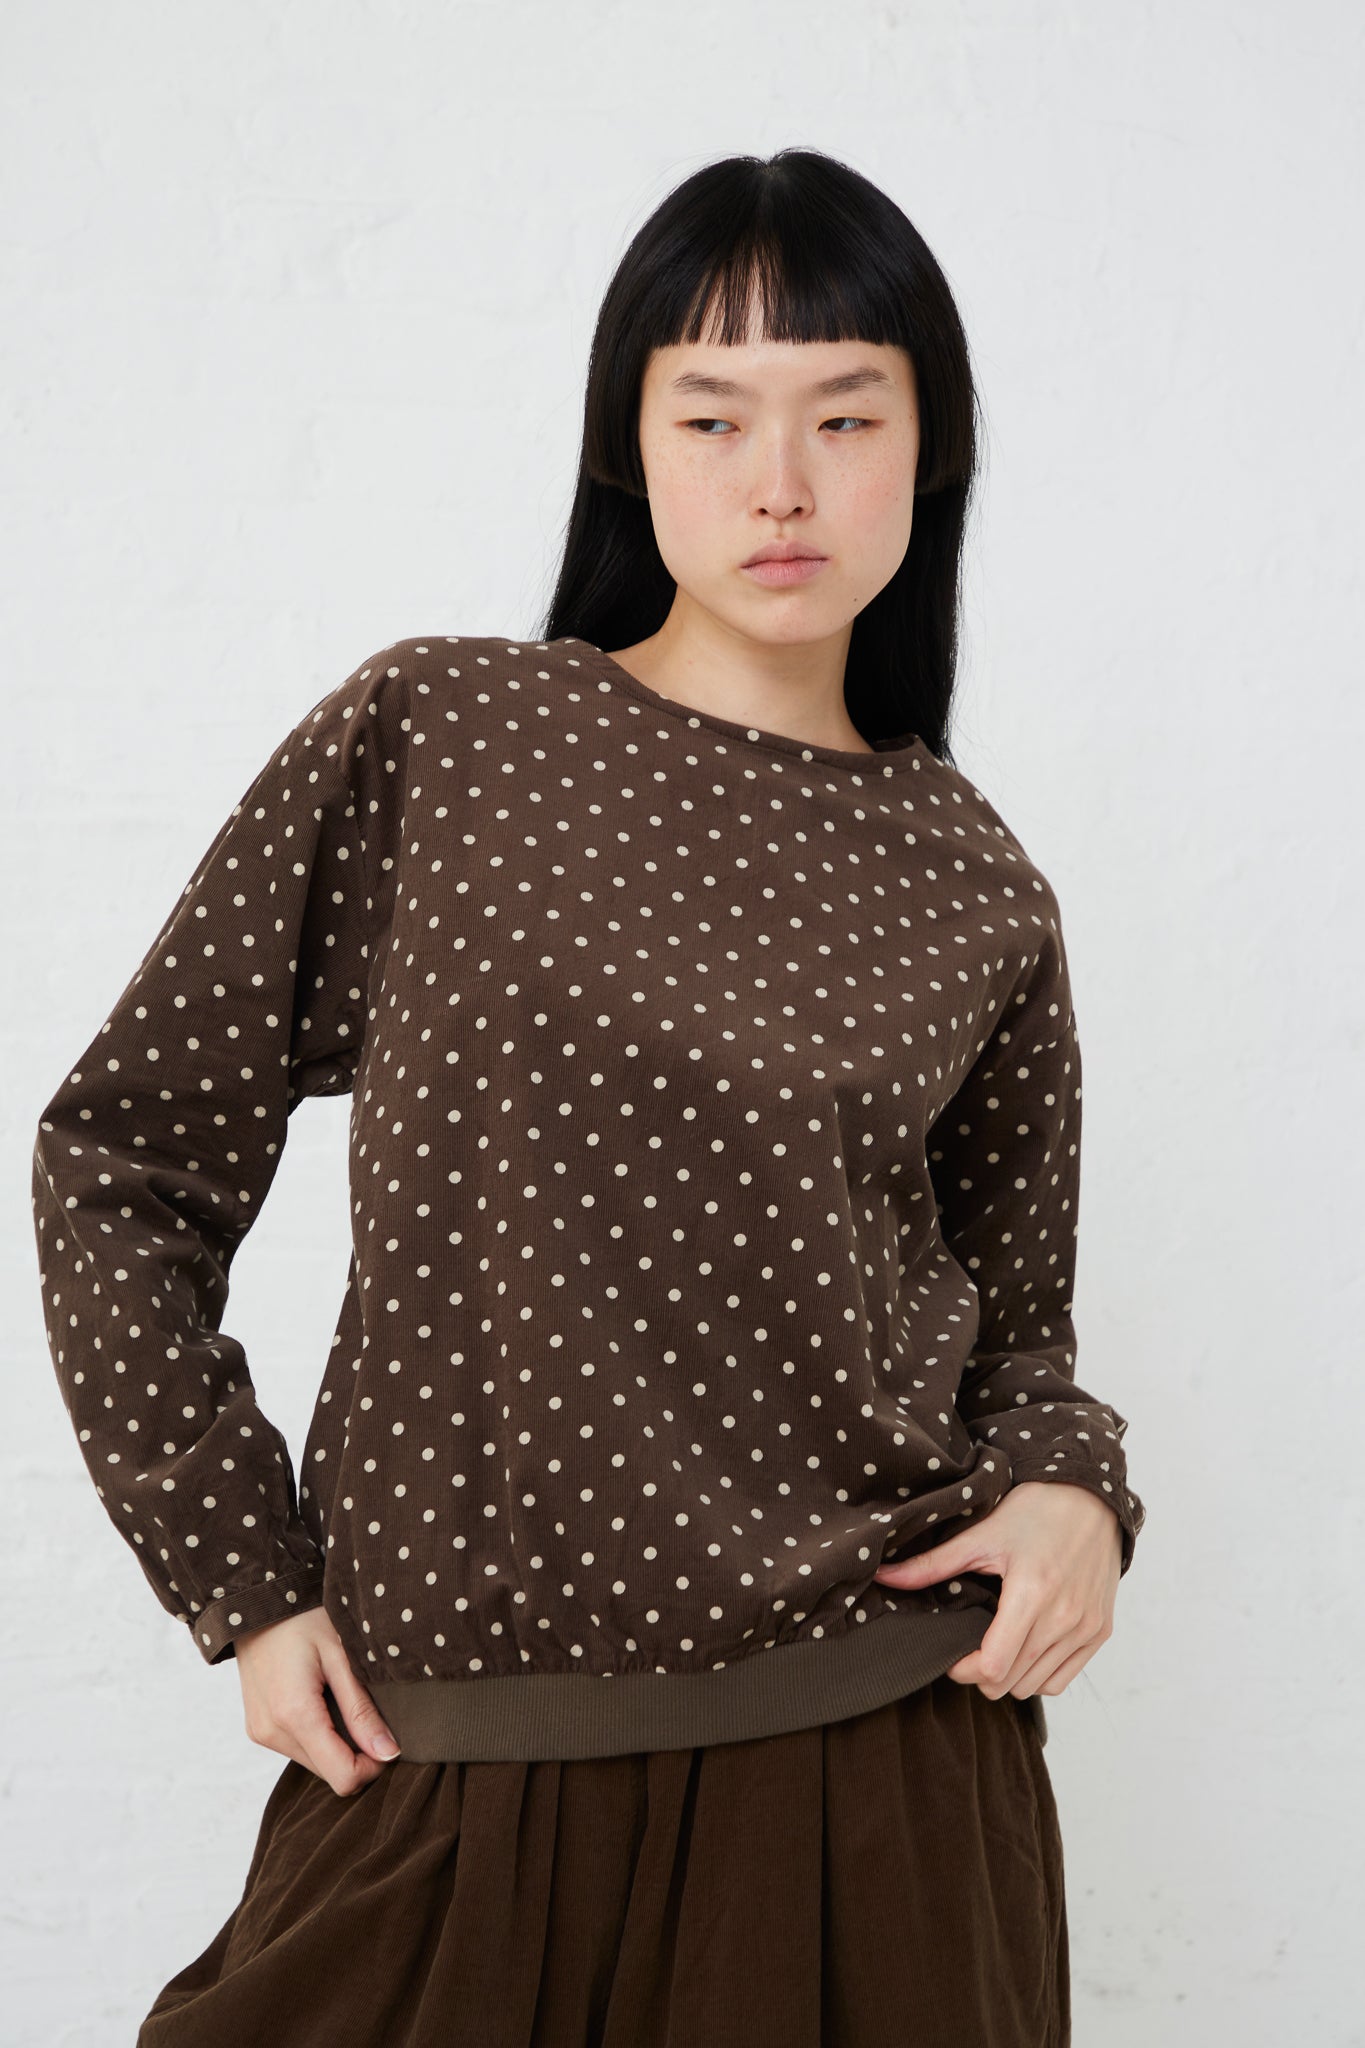 Relaxed fit Ichi brown polka dot sweatshirt made with cotton.